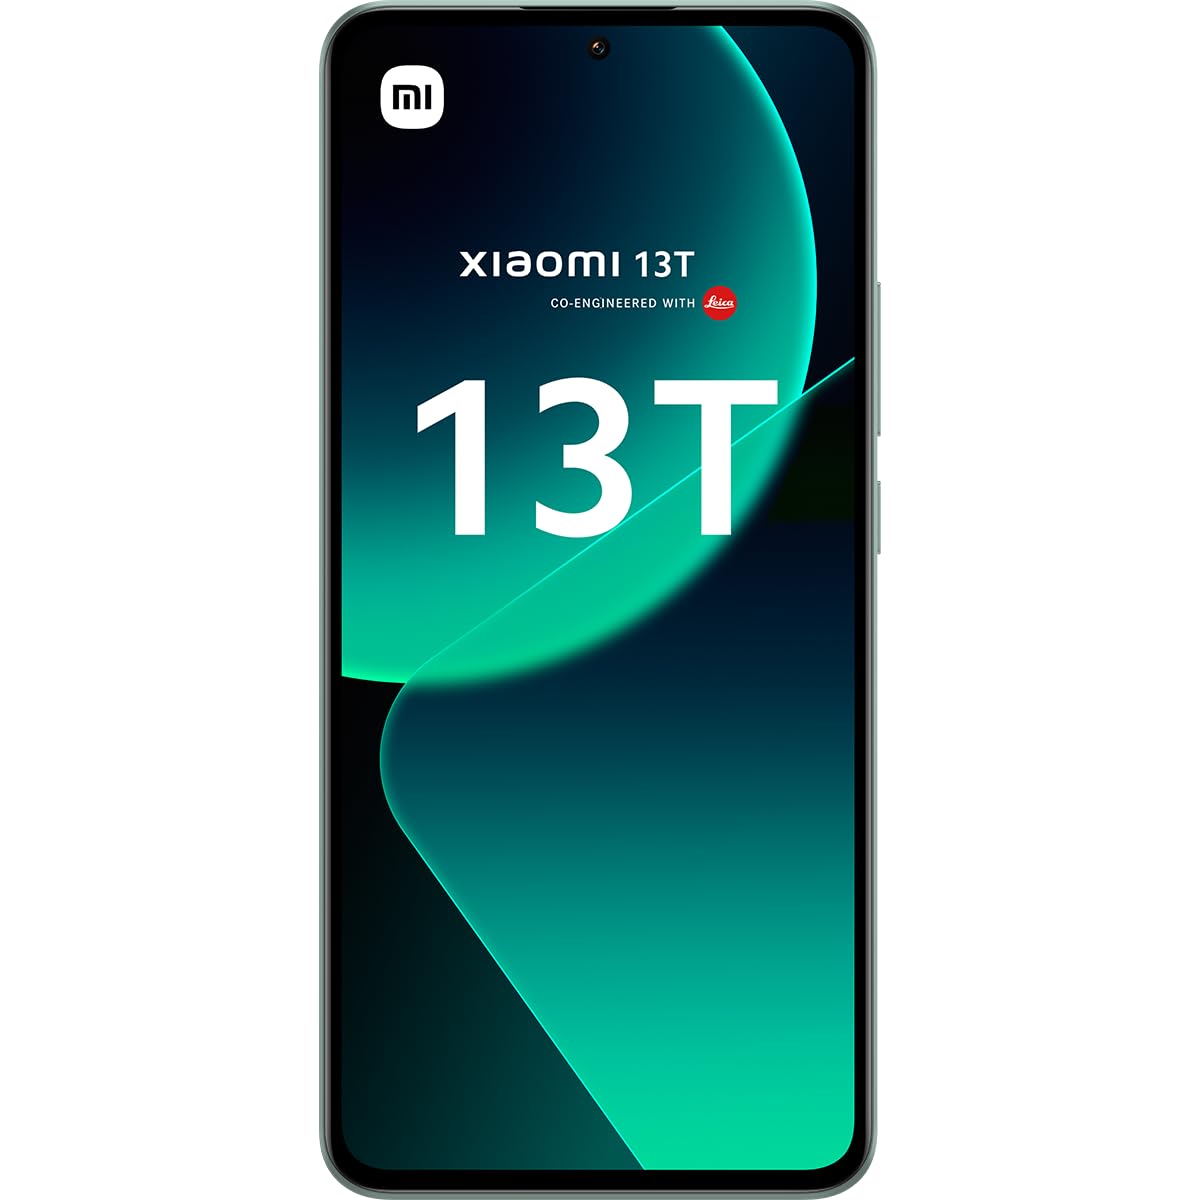 Xiaomi 13T 5G Dual 256GB ROM 8GB RAM Factory Unlocked (GSM Only | No CDMA - not Compatible with Verizon/Sprint) Global Mobile Cell Phone - Meadow Green